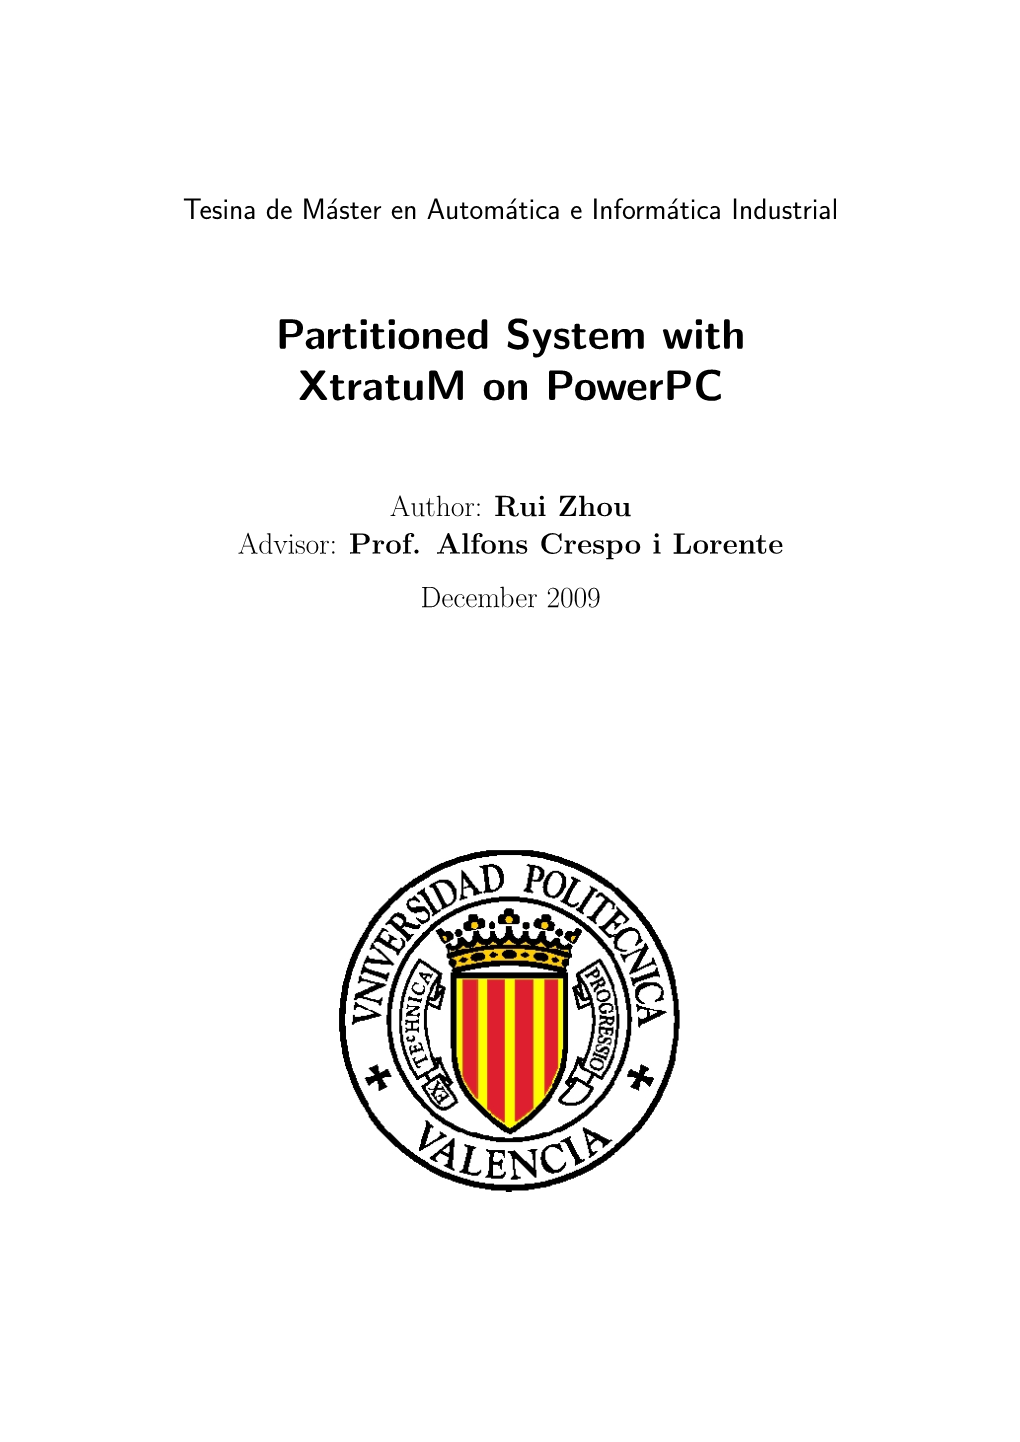 Partitioned System with Xtratum on Powerpc